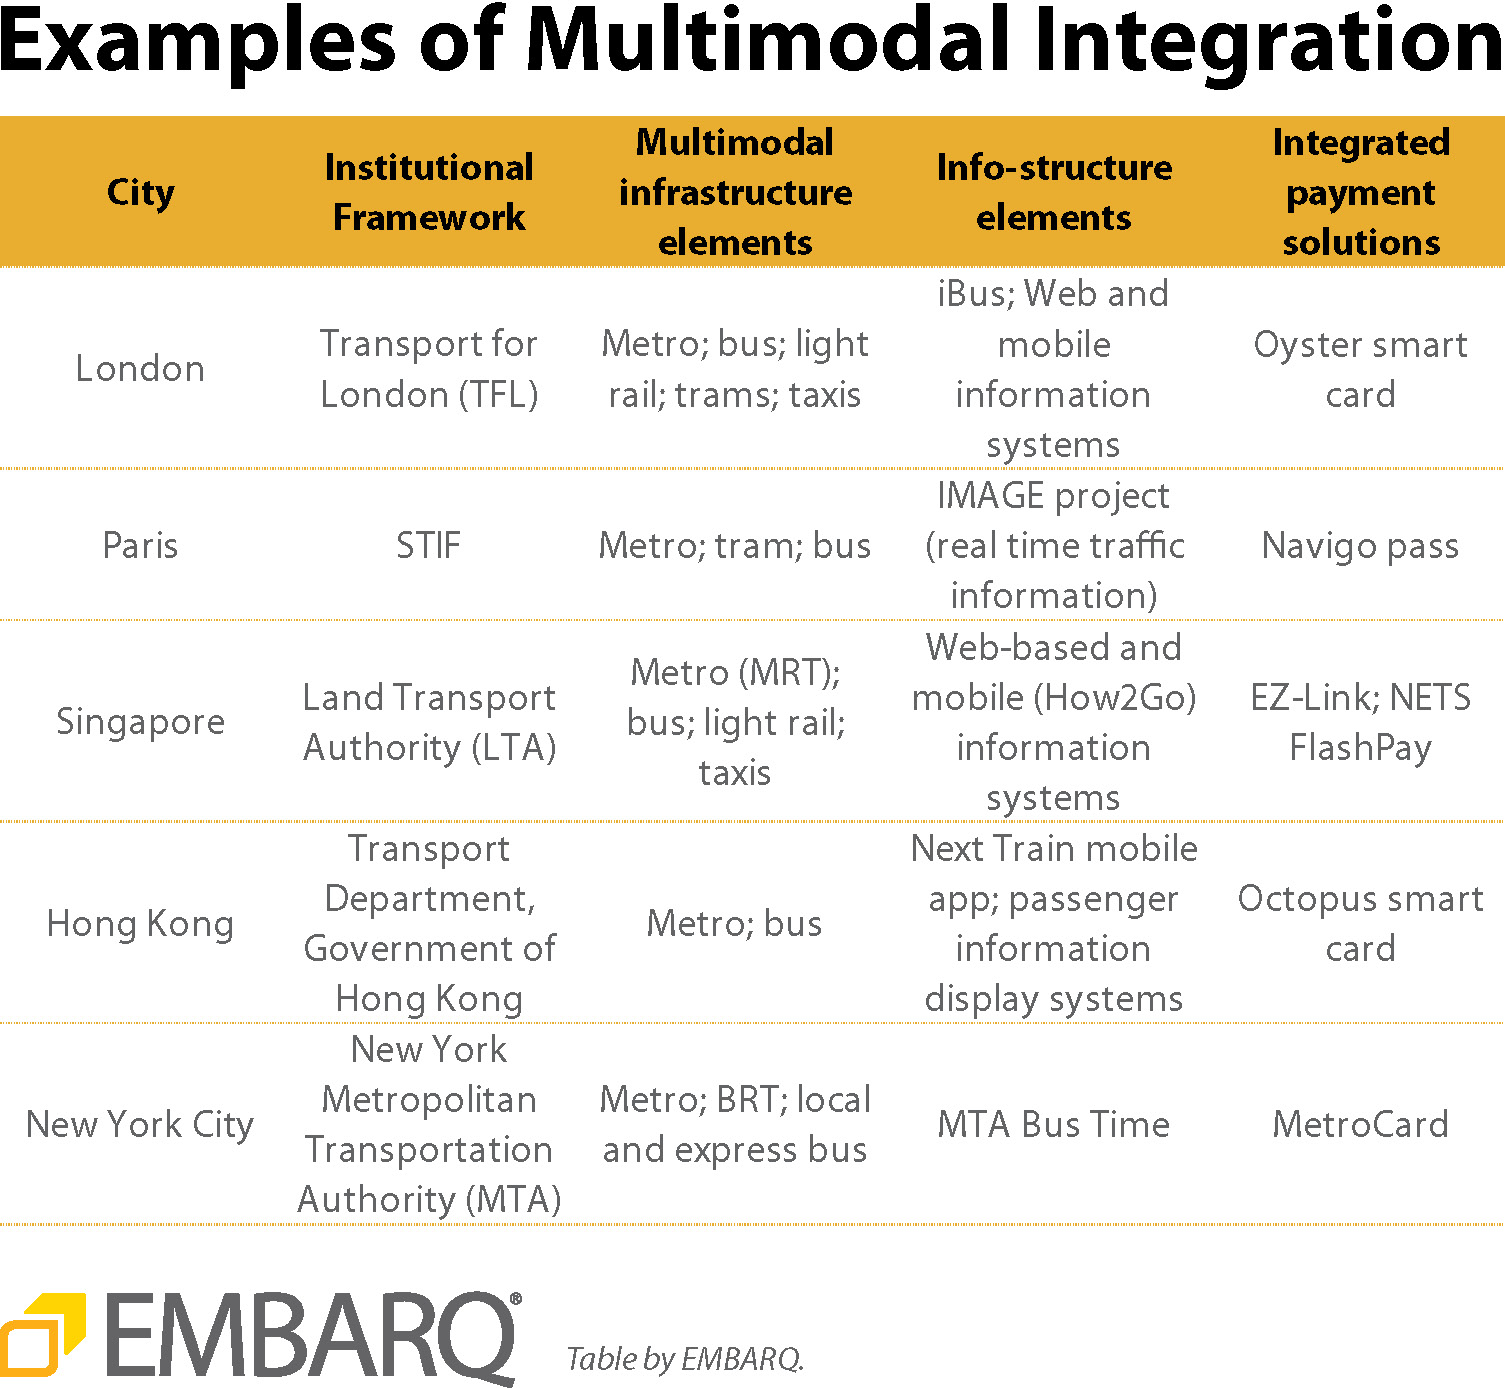 Examples of Multimodal Integration. Graphic by EMBARQ.